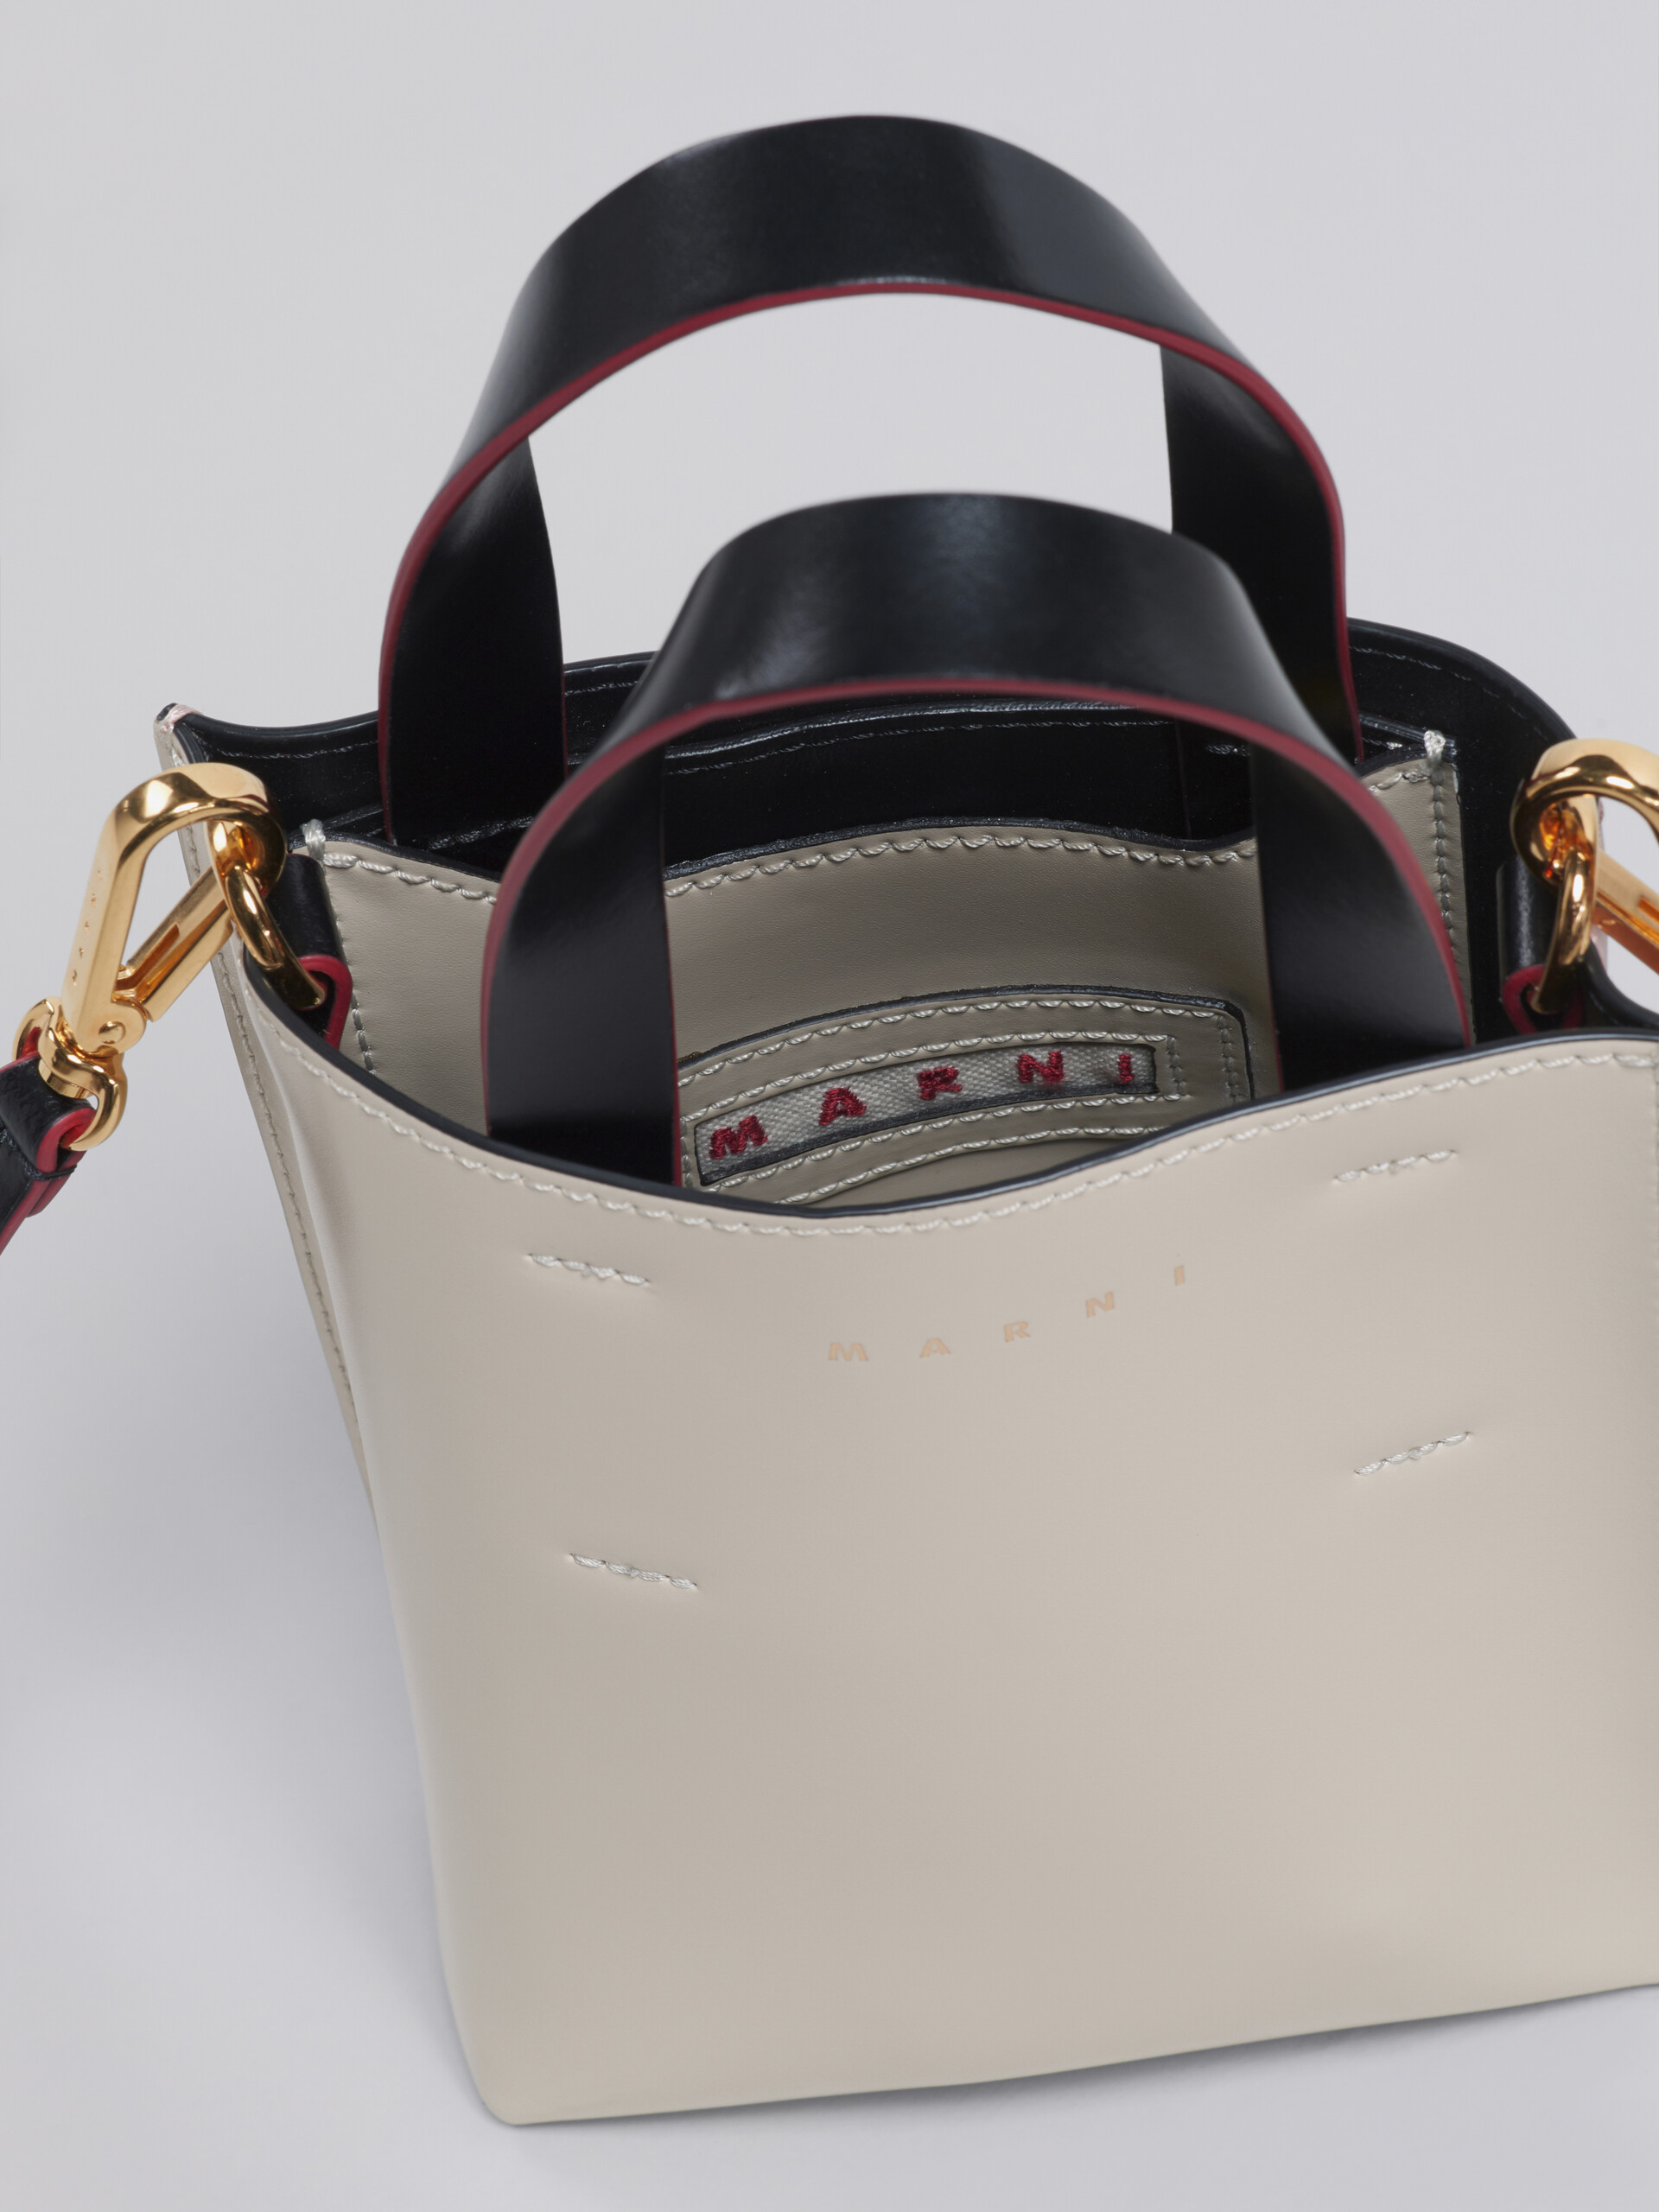 MUSEO nano bag in beige and pink shiny leather - Shopping Bags - Image 3